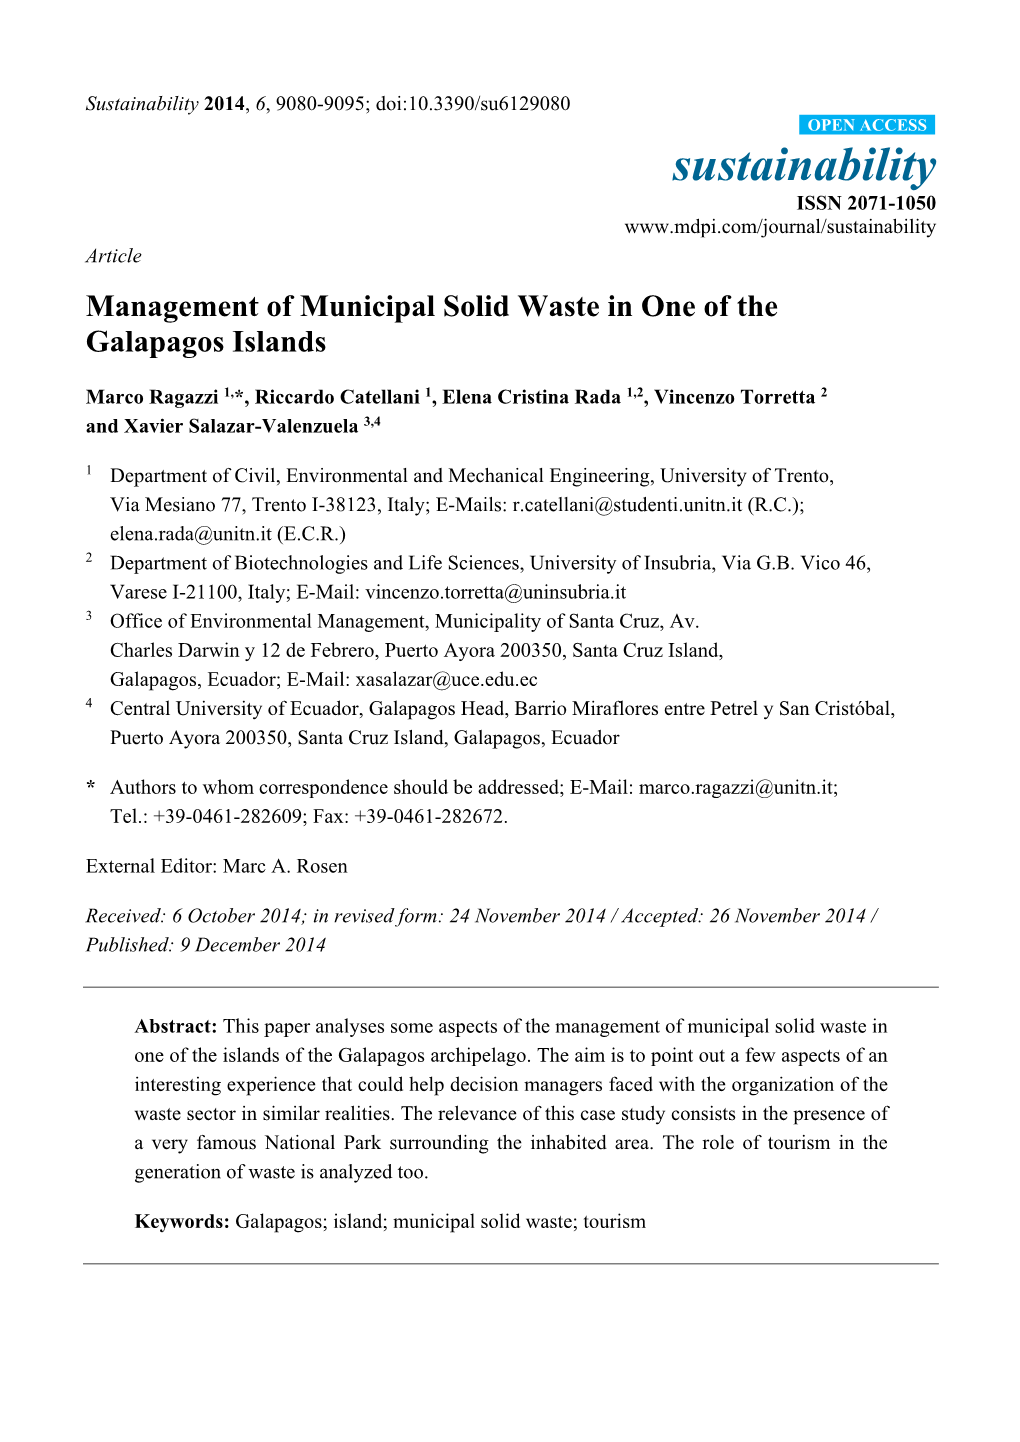 Management of Municipal Solid Waste in One of the Galapagos Islands